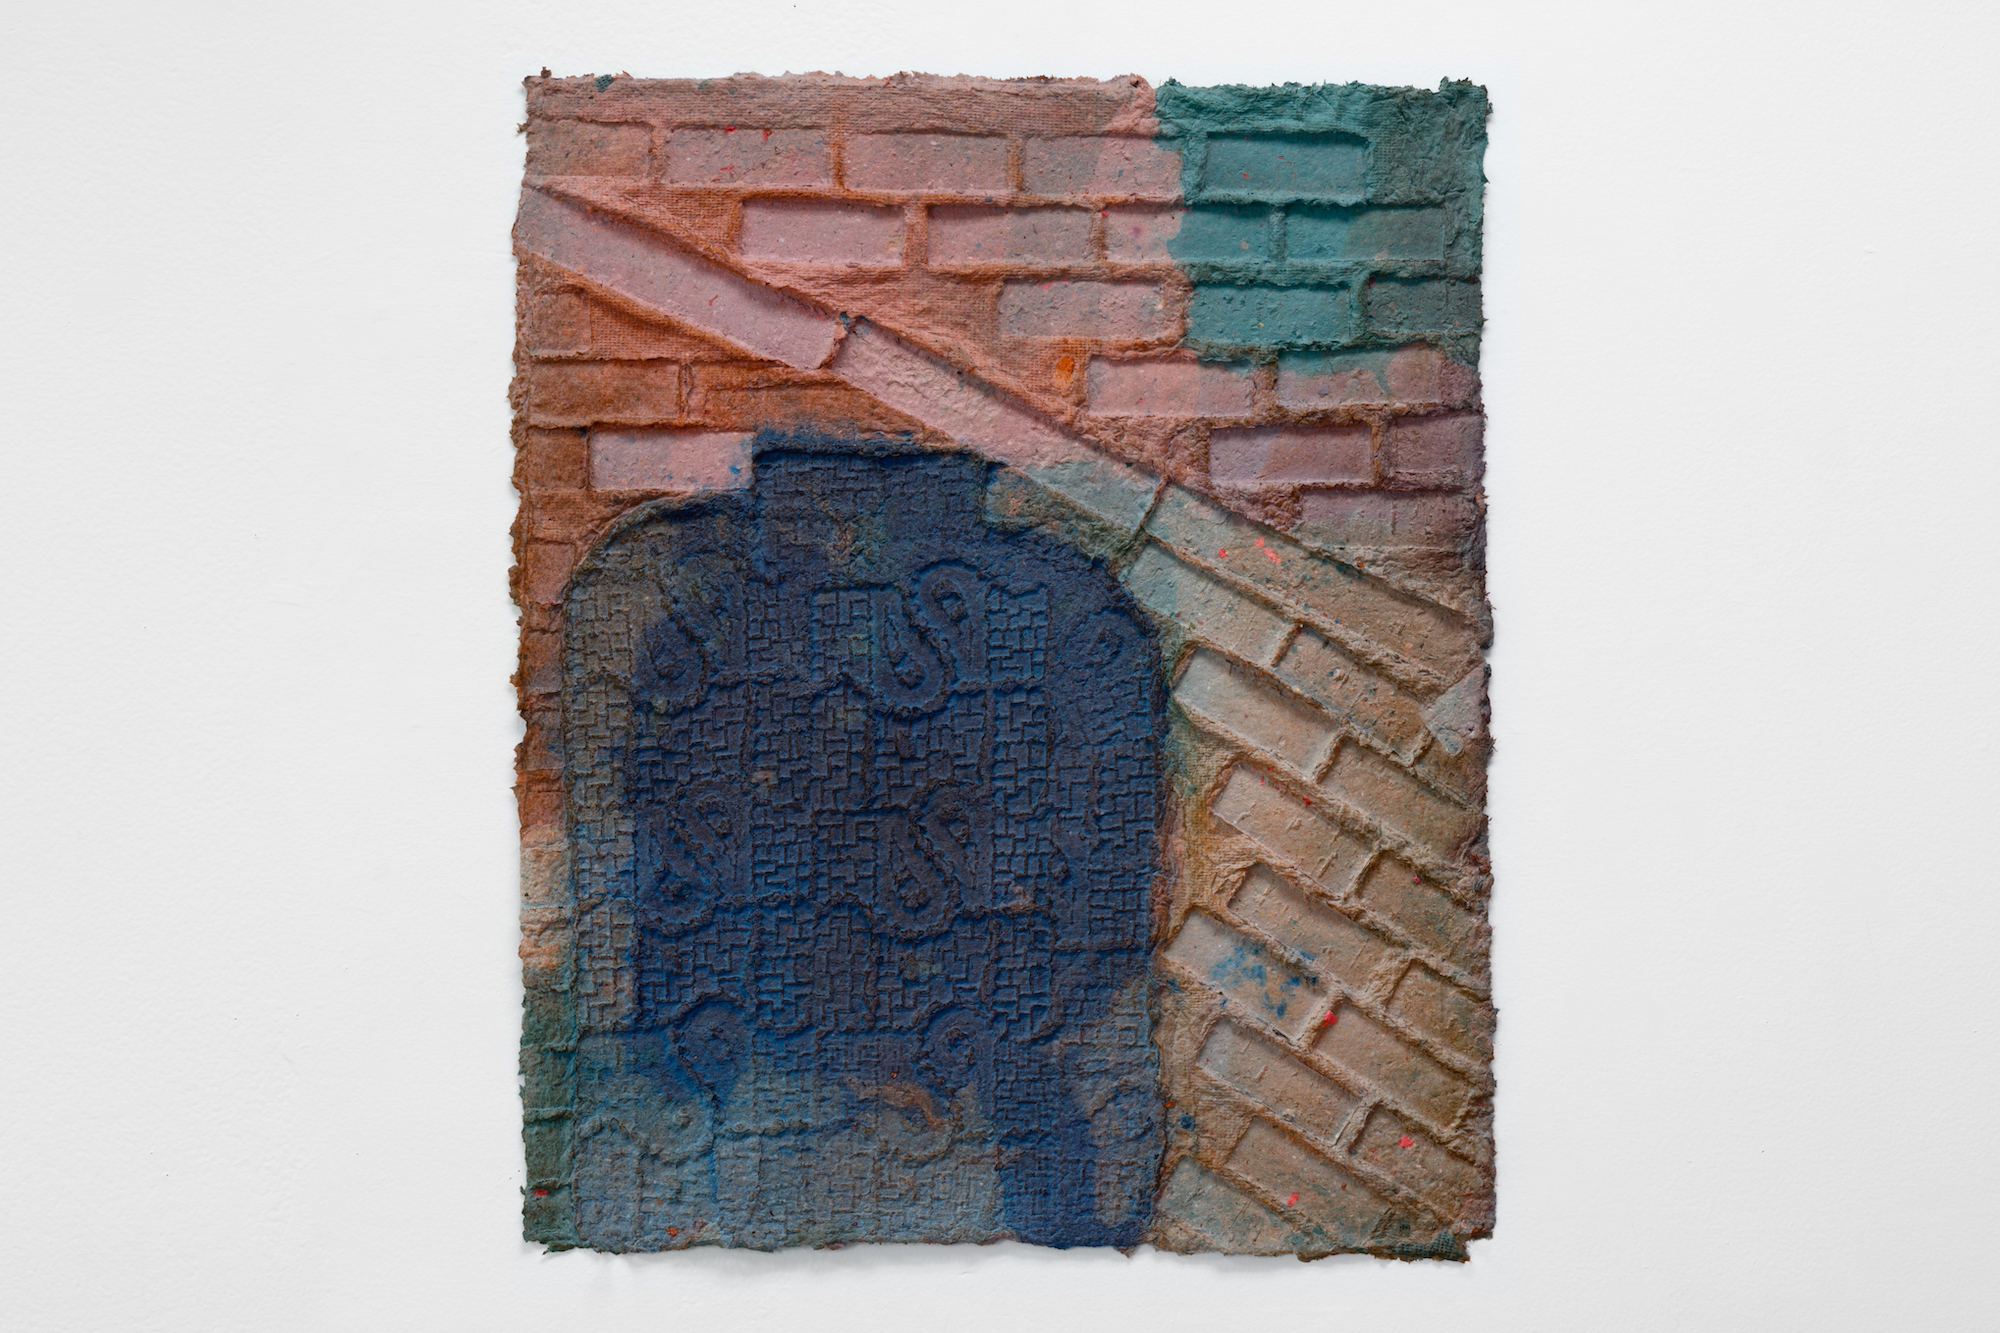 On the corner, Under the sun, 2021, Dyed handmade paper, 26.5 x 22.5 in 